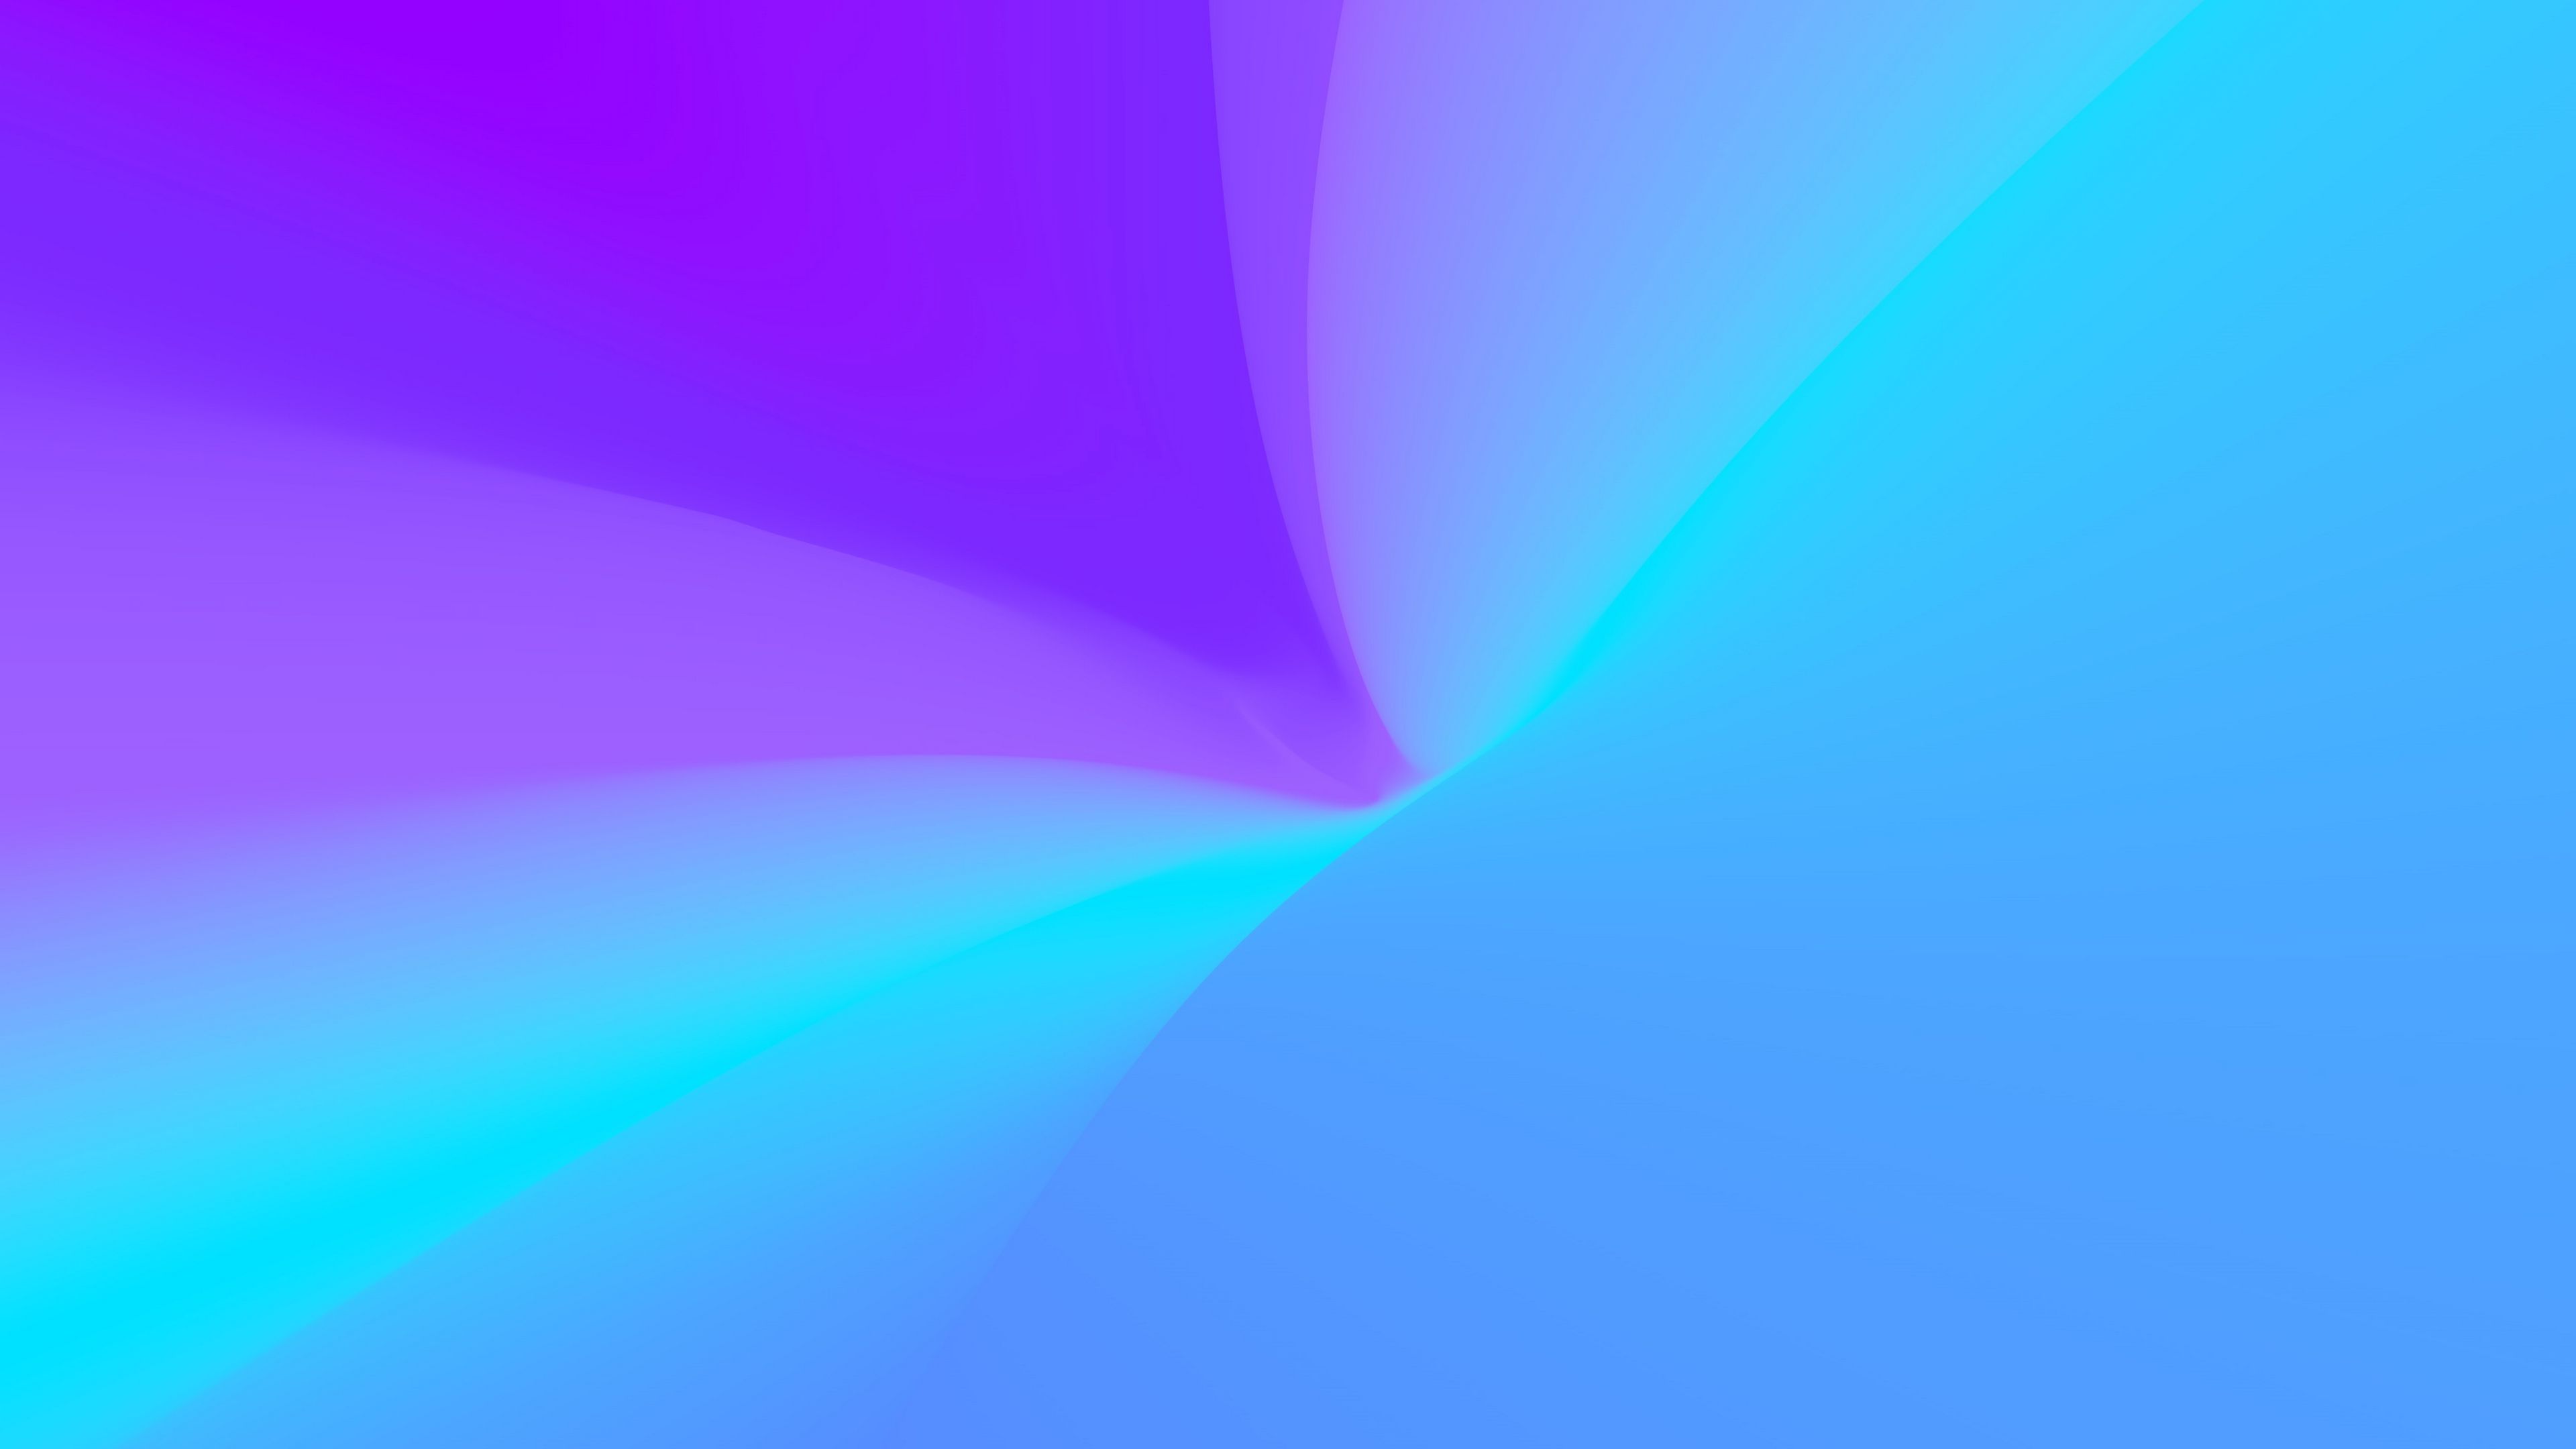 Download wallpaper 3840x2160 background, color, blur, purple, blue,  abstraction, wallpaper 4k uhd 16:9 hd background